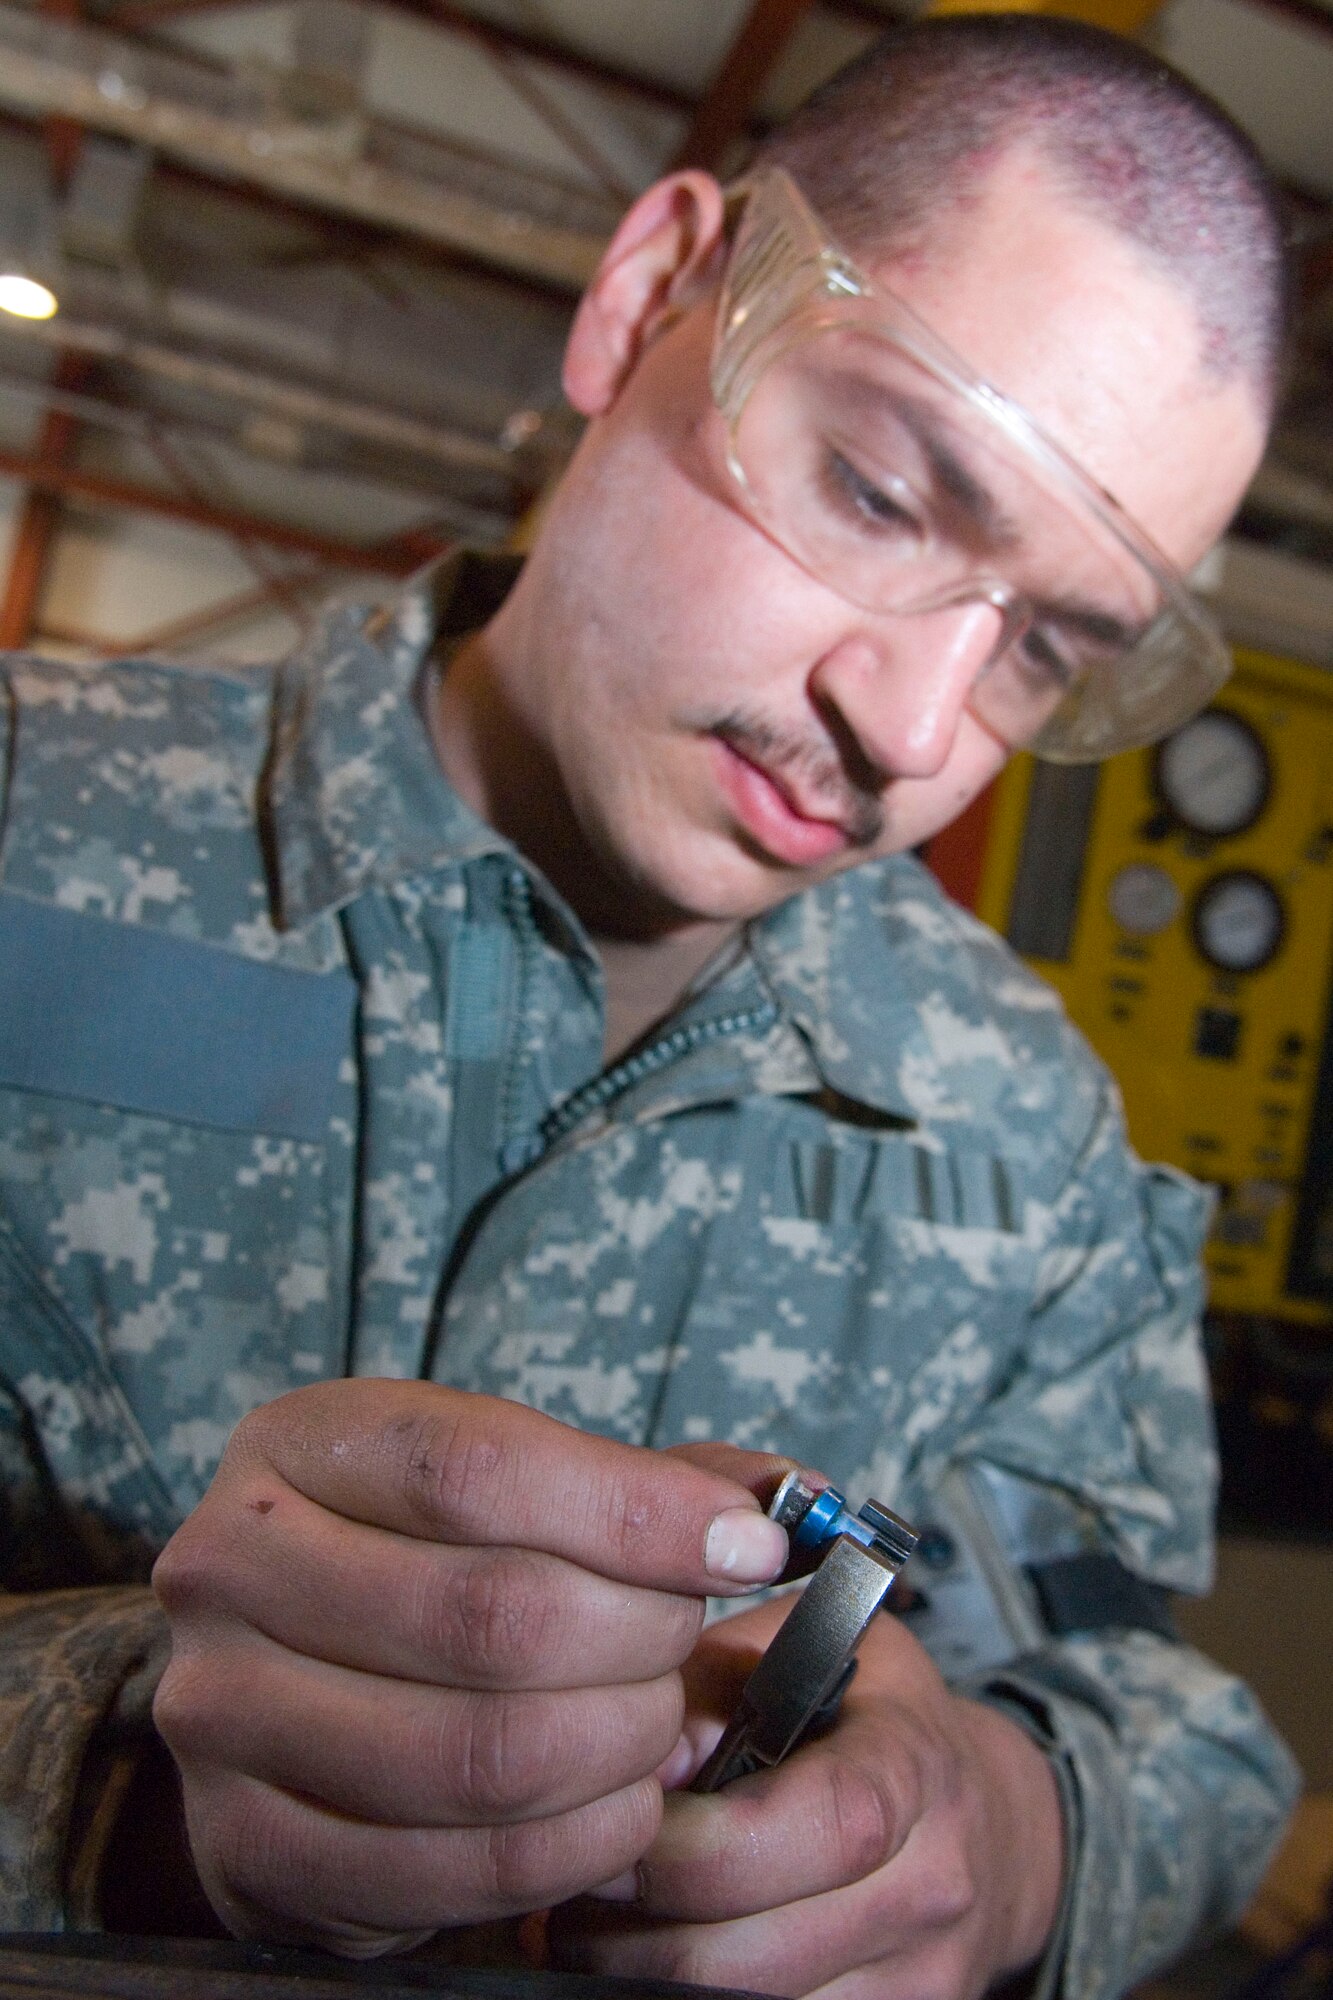 BALAD AIR BASE, Iraq -- Staff Sgt. Bobby Hausermann, a 332nd Expeditionary Maintenance Squadron aircraft ground equipment maintainer, removes a removes a cap seal from a defective piece of hydraulic line. The cap will securely fasten flared hydraulic lines to components on the hydraulic test stand. Sergeant Hausermann is deployed from Spangdahlem Air Base, Germany.  (Air Force photo/Staff Sgt. Joshua Garcia) 